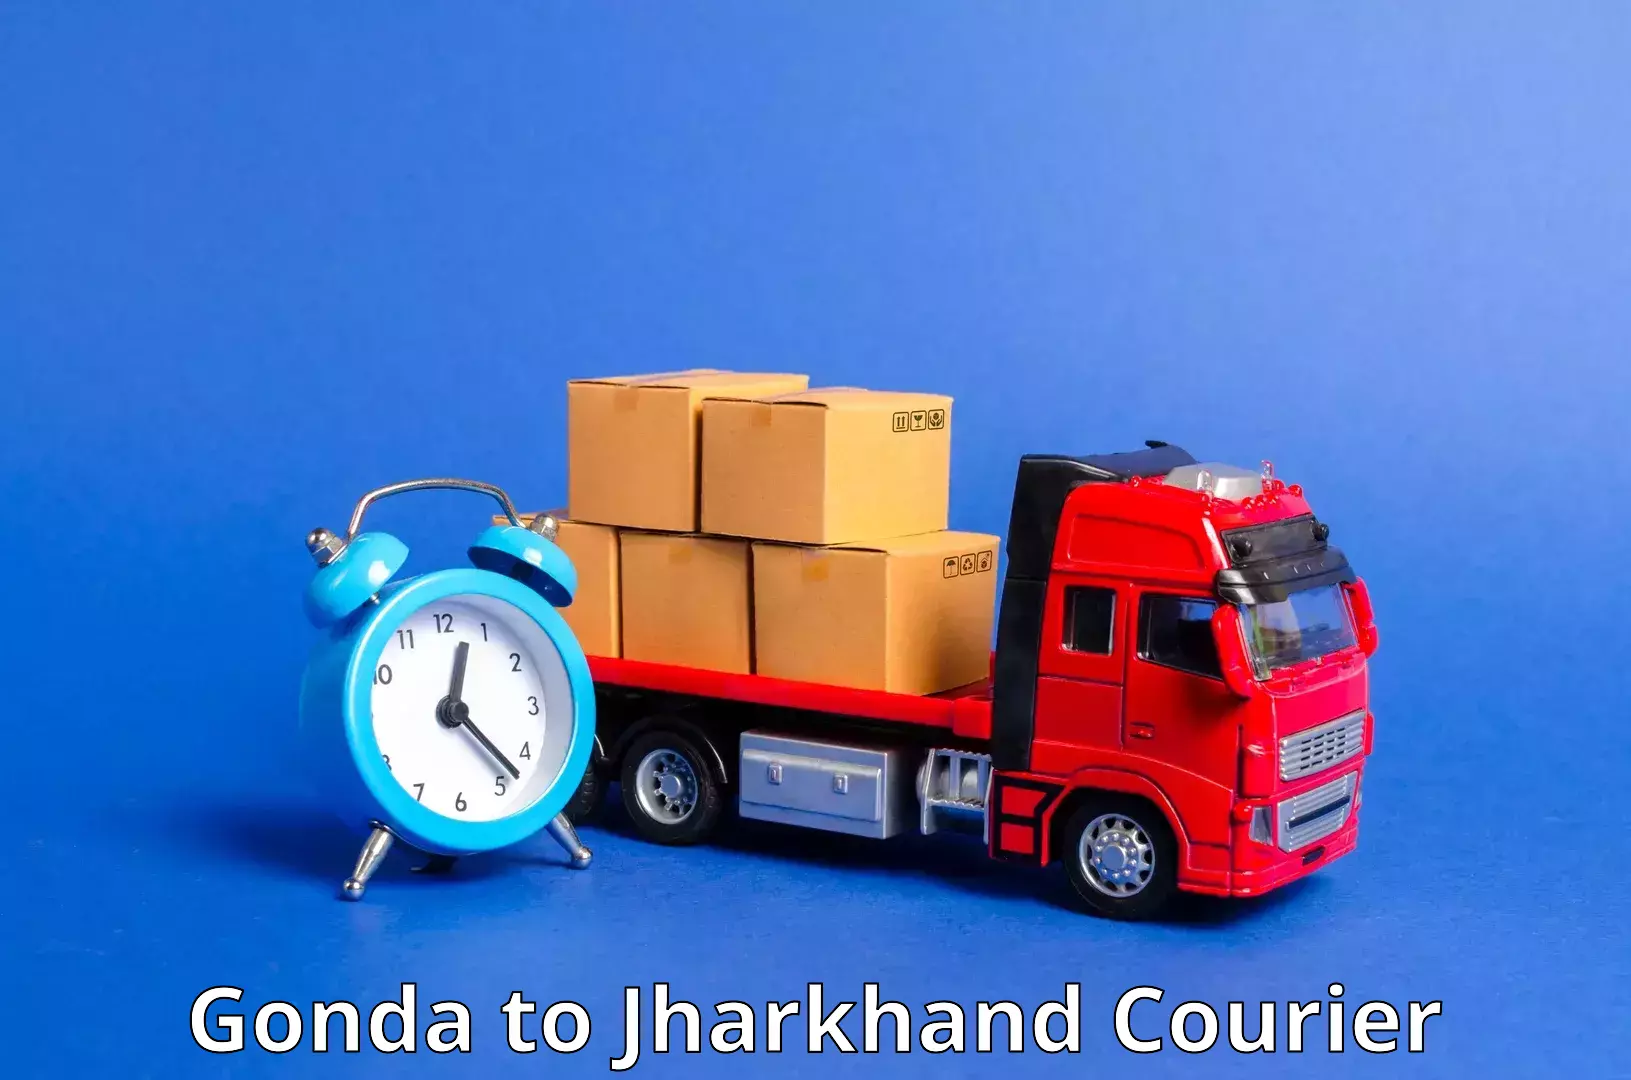 On-call courier service Gonda to IIIT Ranchi